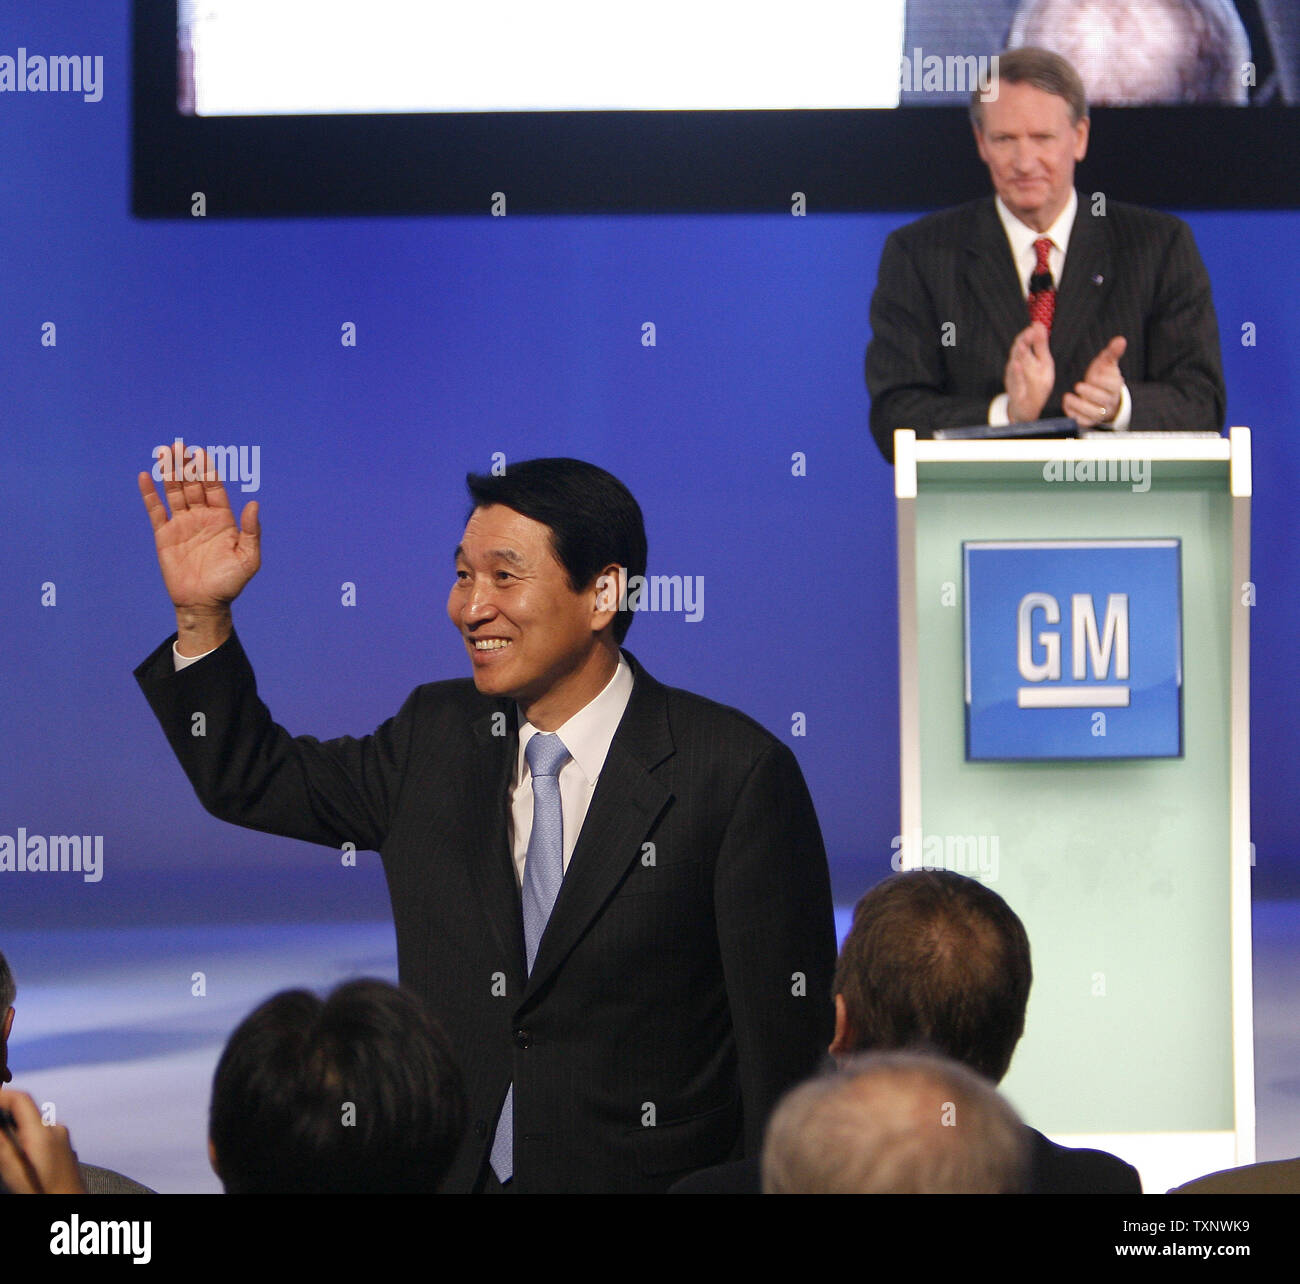 General Motors Chairman and CEO Rick Wagoner (R) acknowledges LG Chem CEO Peter Kim during a press event at the North American International Auto Show at the Cobo Center on January 12, 2009 in Detroit, Michigan. GM announced Friday that it will manufacture its own battery packs for the Chevy Volt in the United States and that it has selected LG Chem of Korea to provide the lithium ion cells for the batteries. (UPI Photo/Brian Kersey) Stock Photo